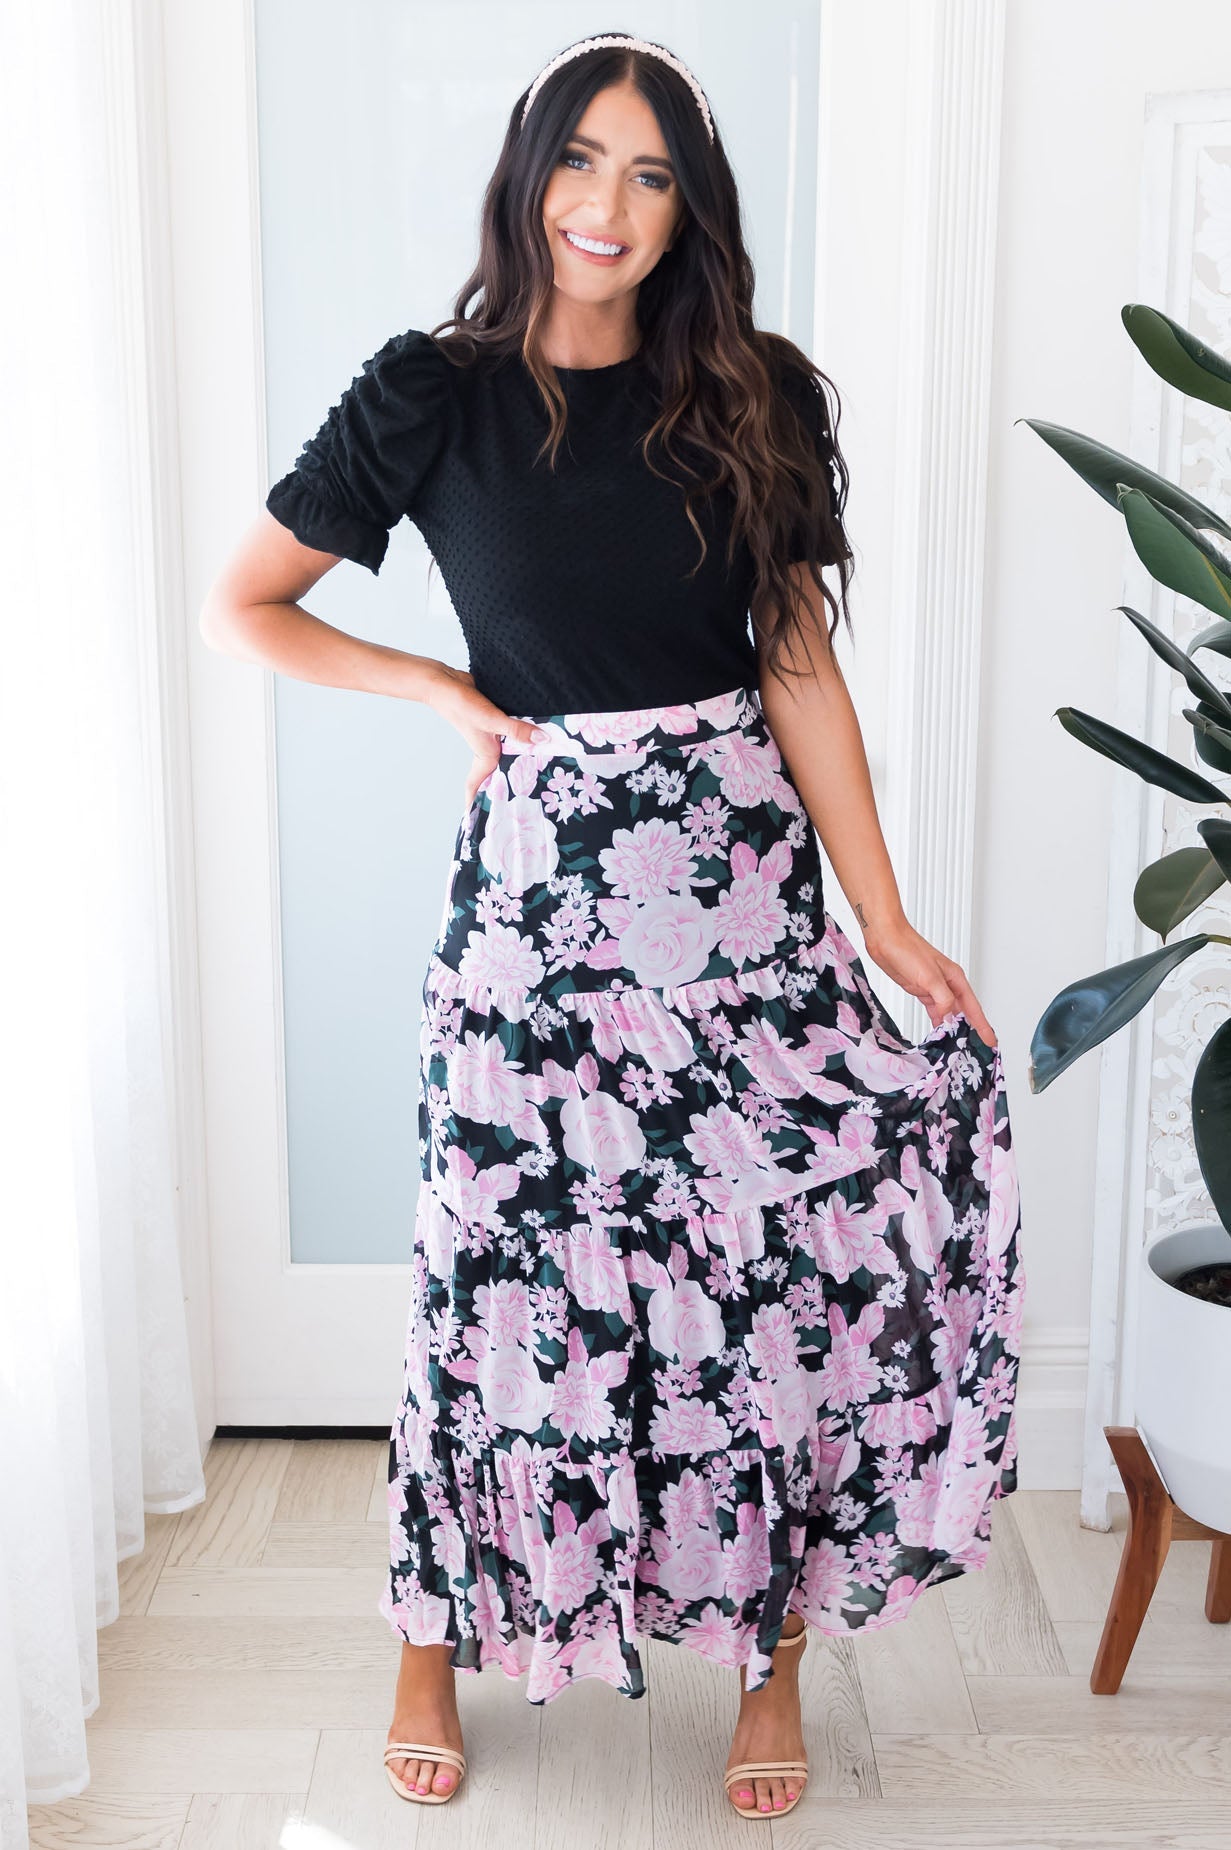 Pink Floral Maxi Skirt, Buy gorgeous summer maxi skirts